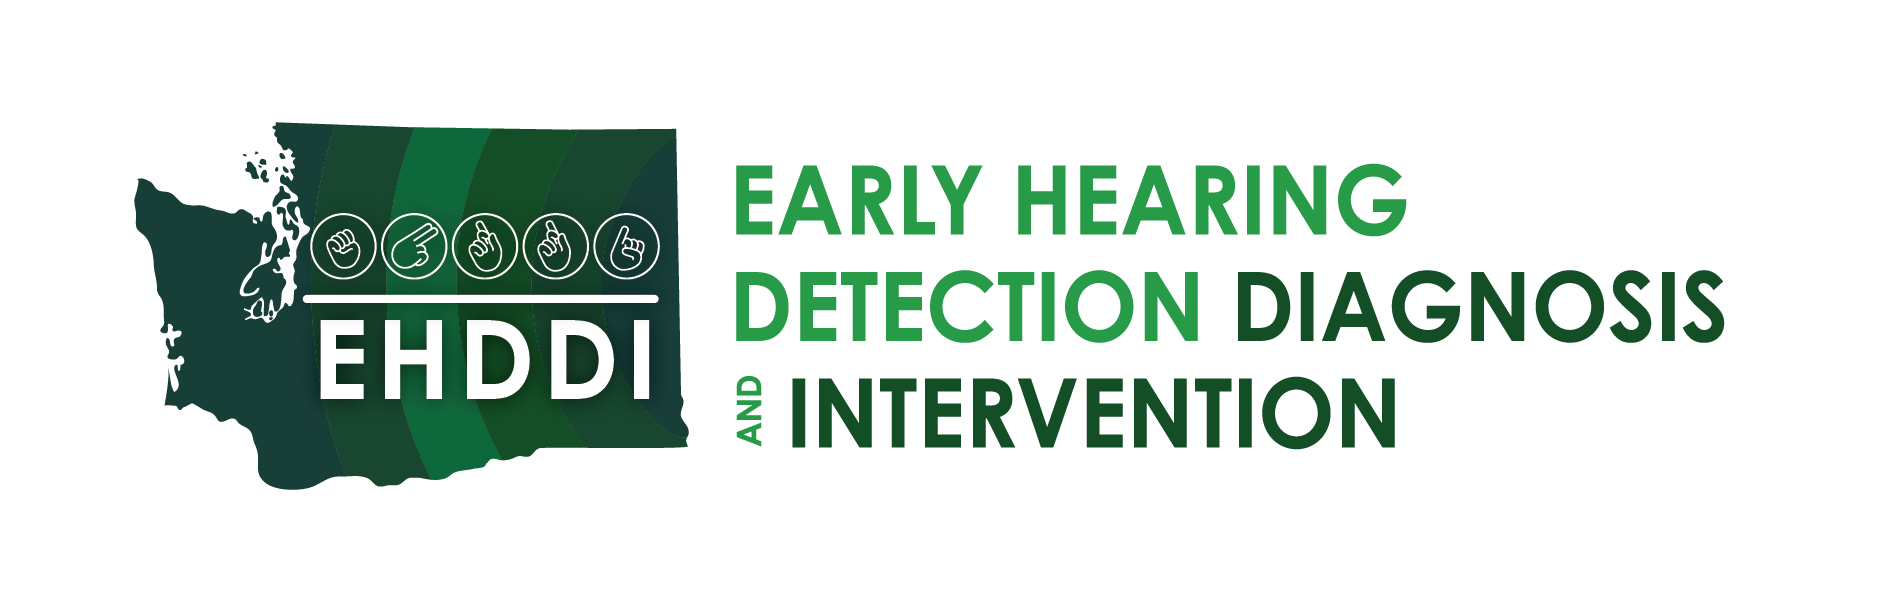 Early Hearing Detection Diagnosis and Intervention logo